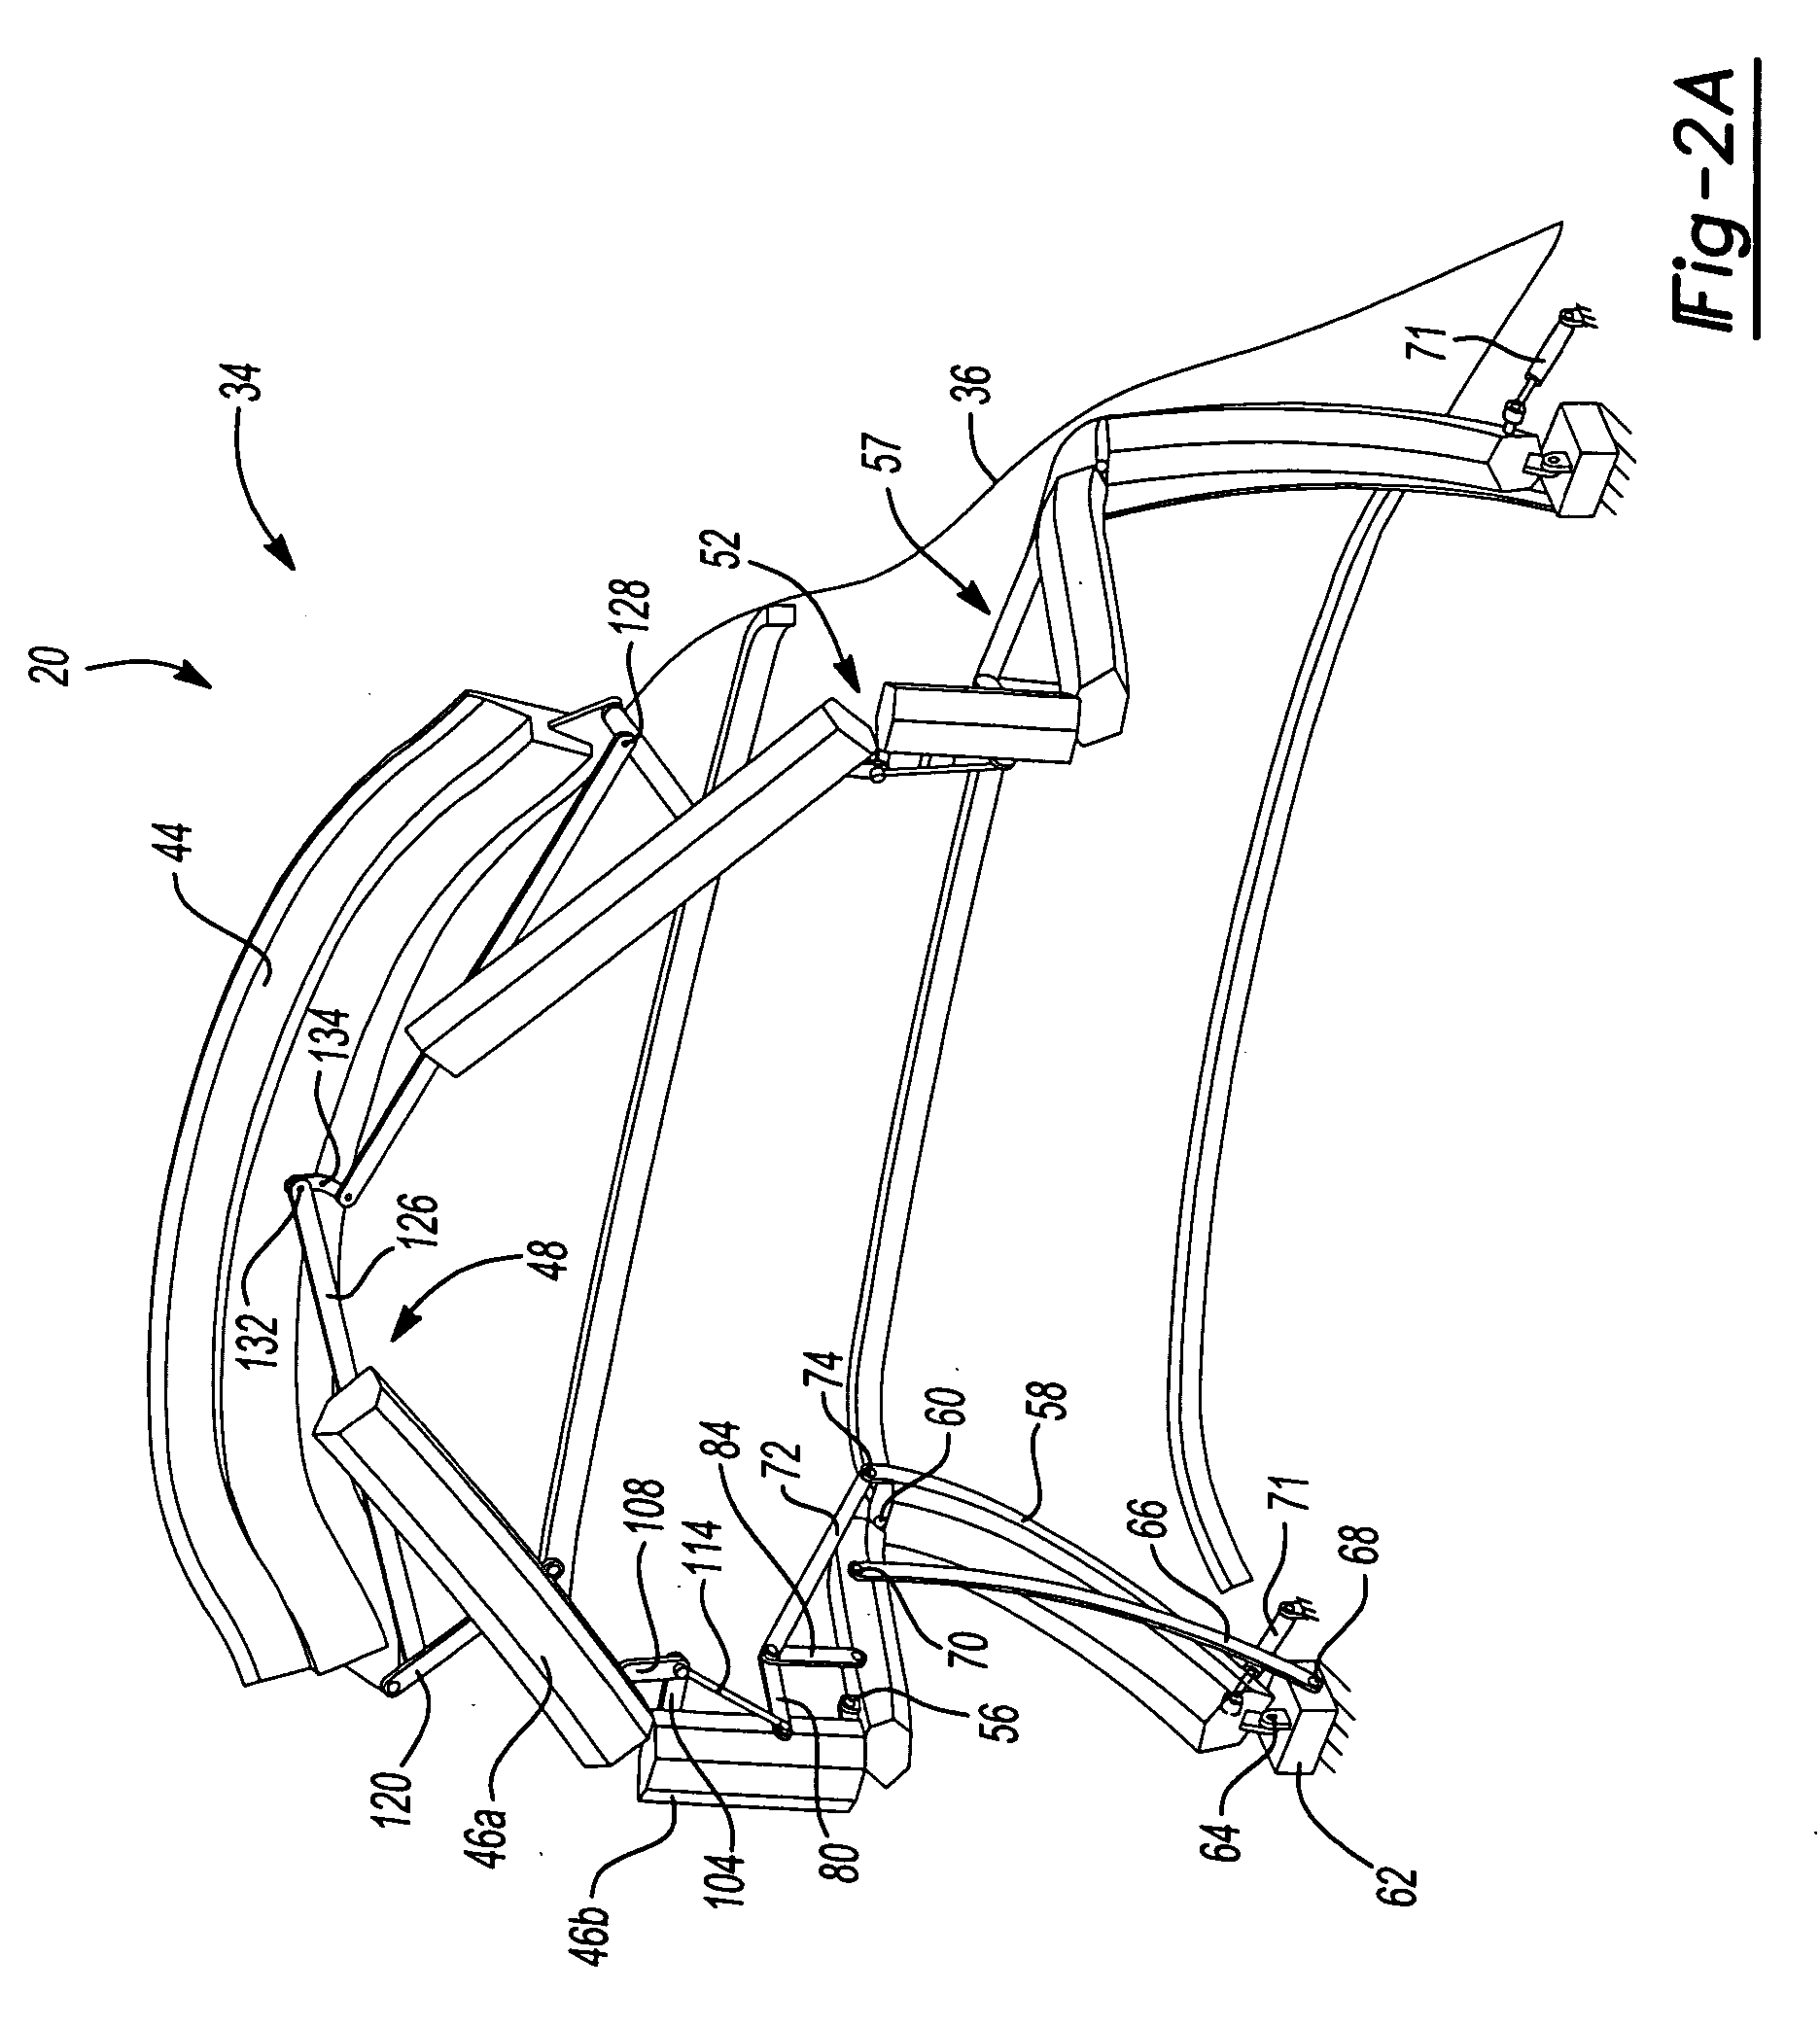 Convertible roof system with dampening device